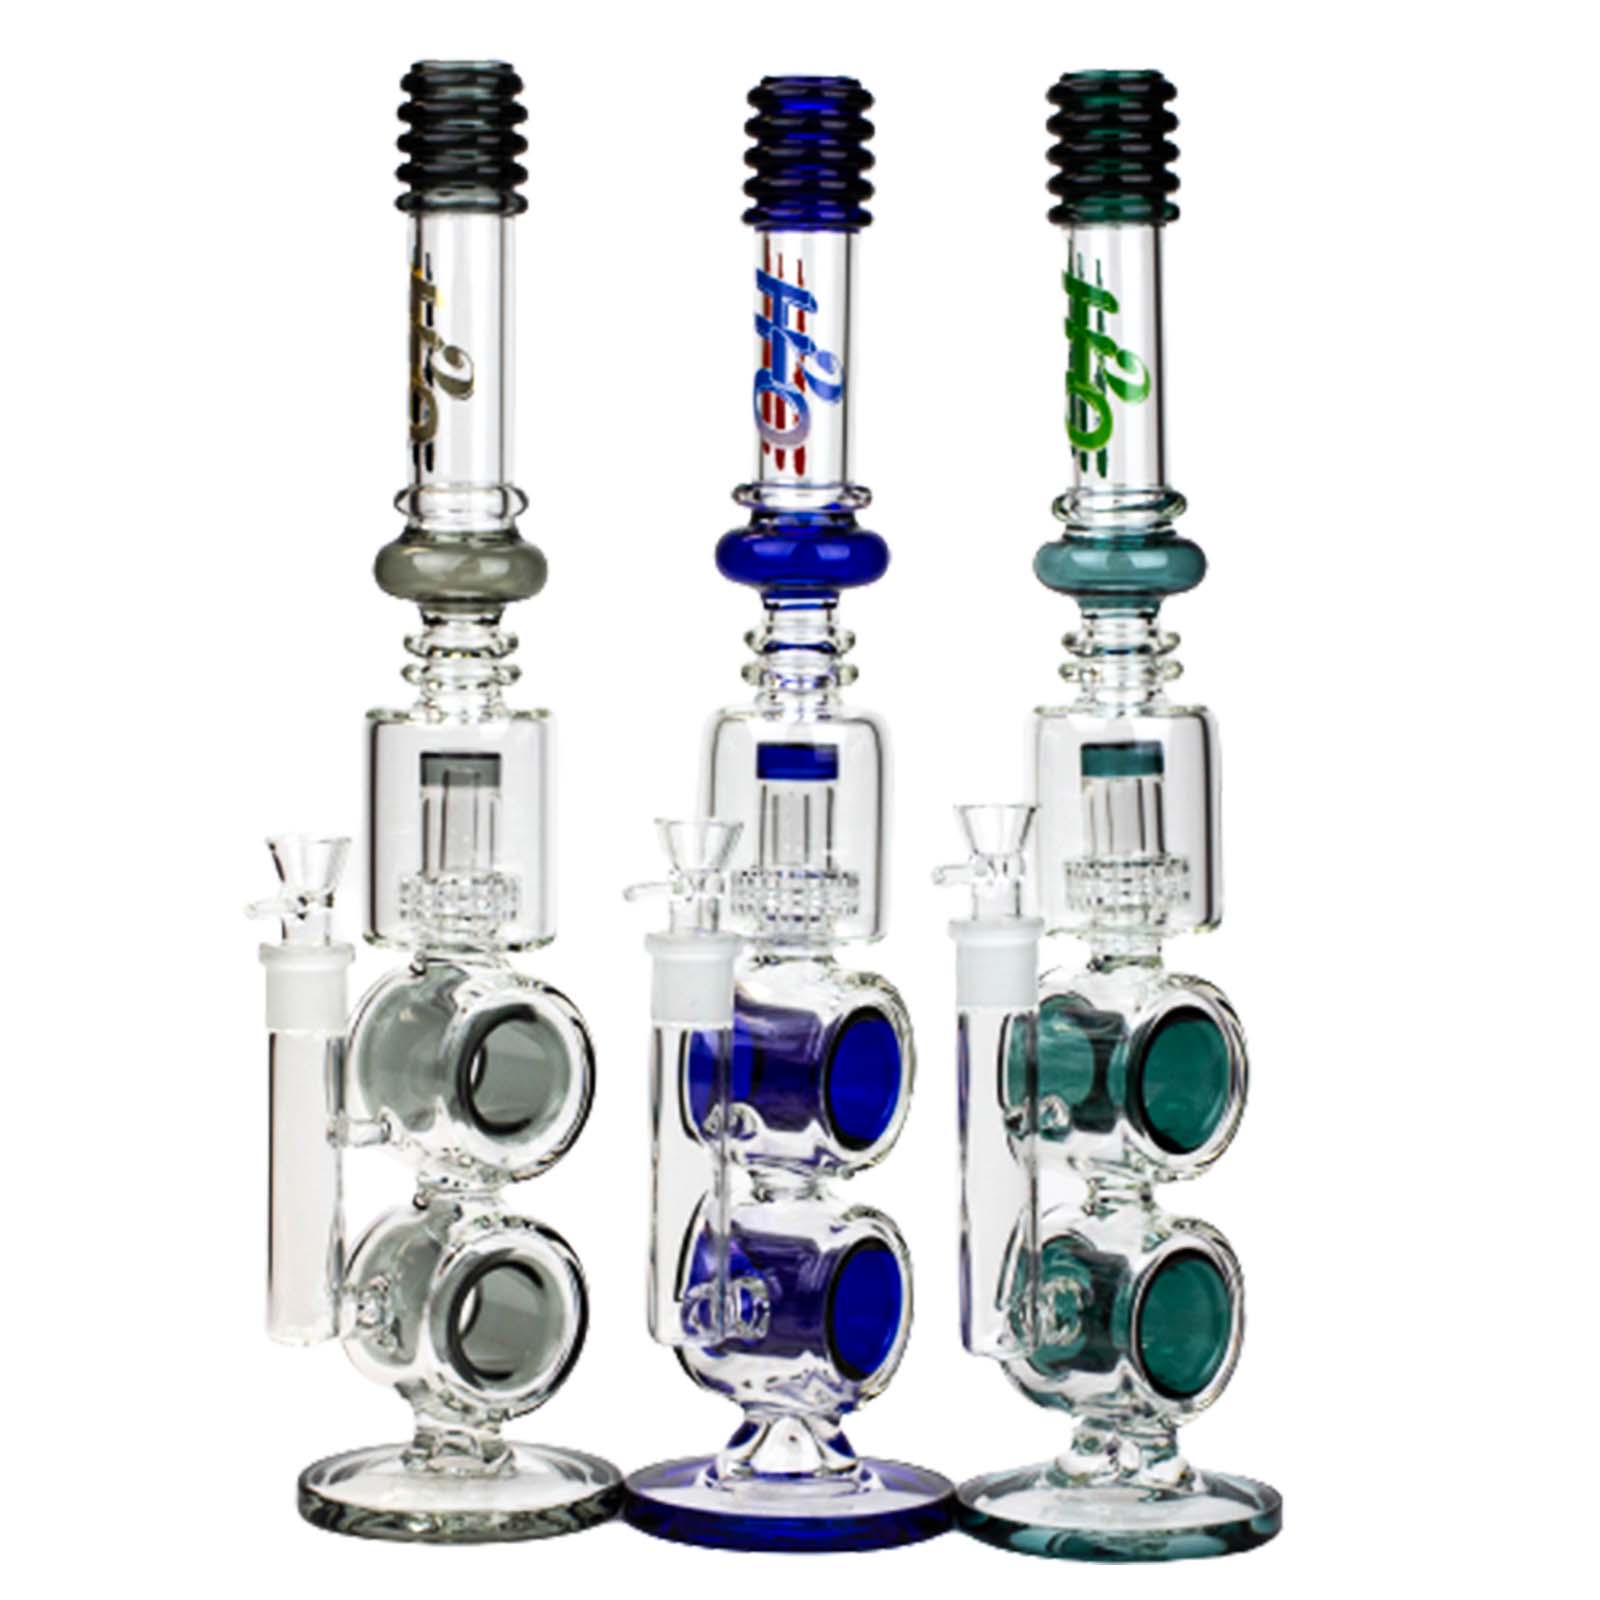 17" H2O Double Ring Glass Bong